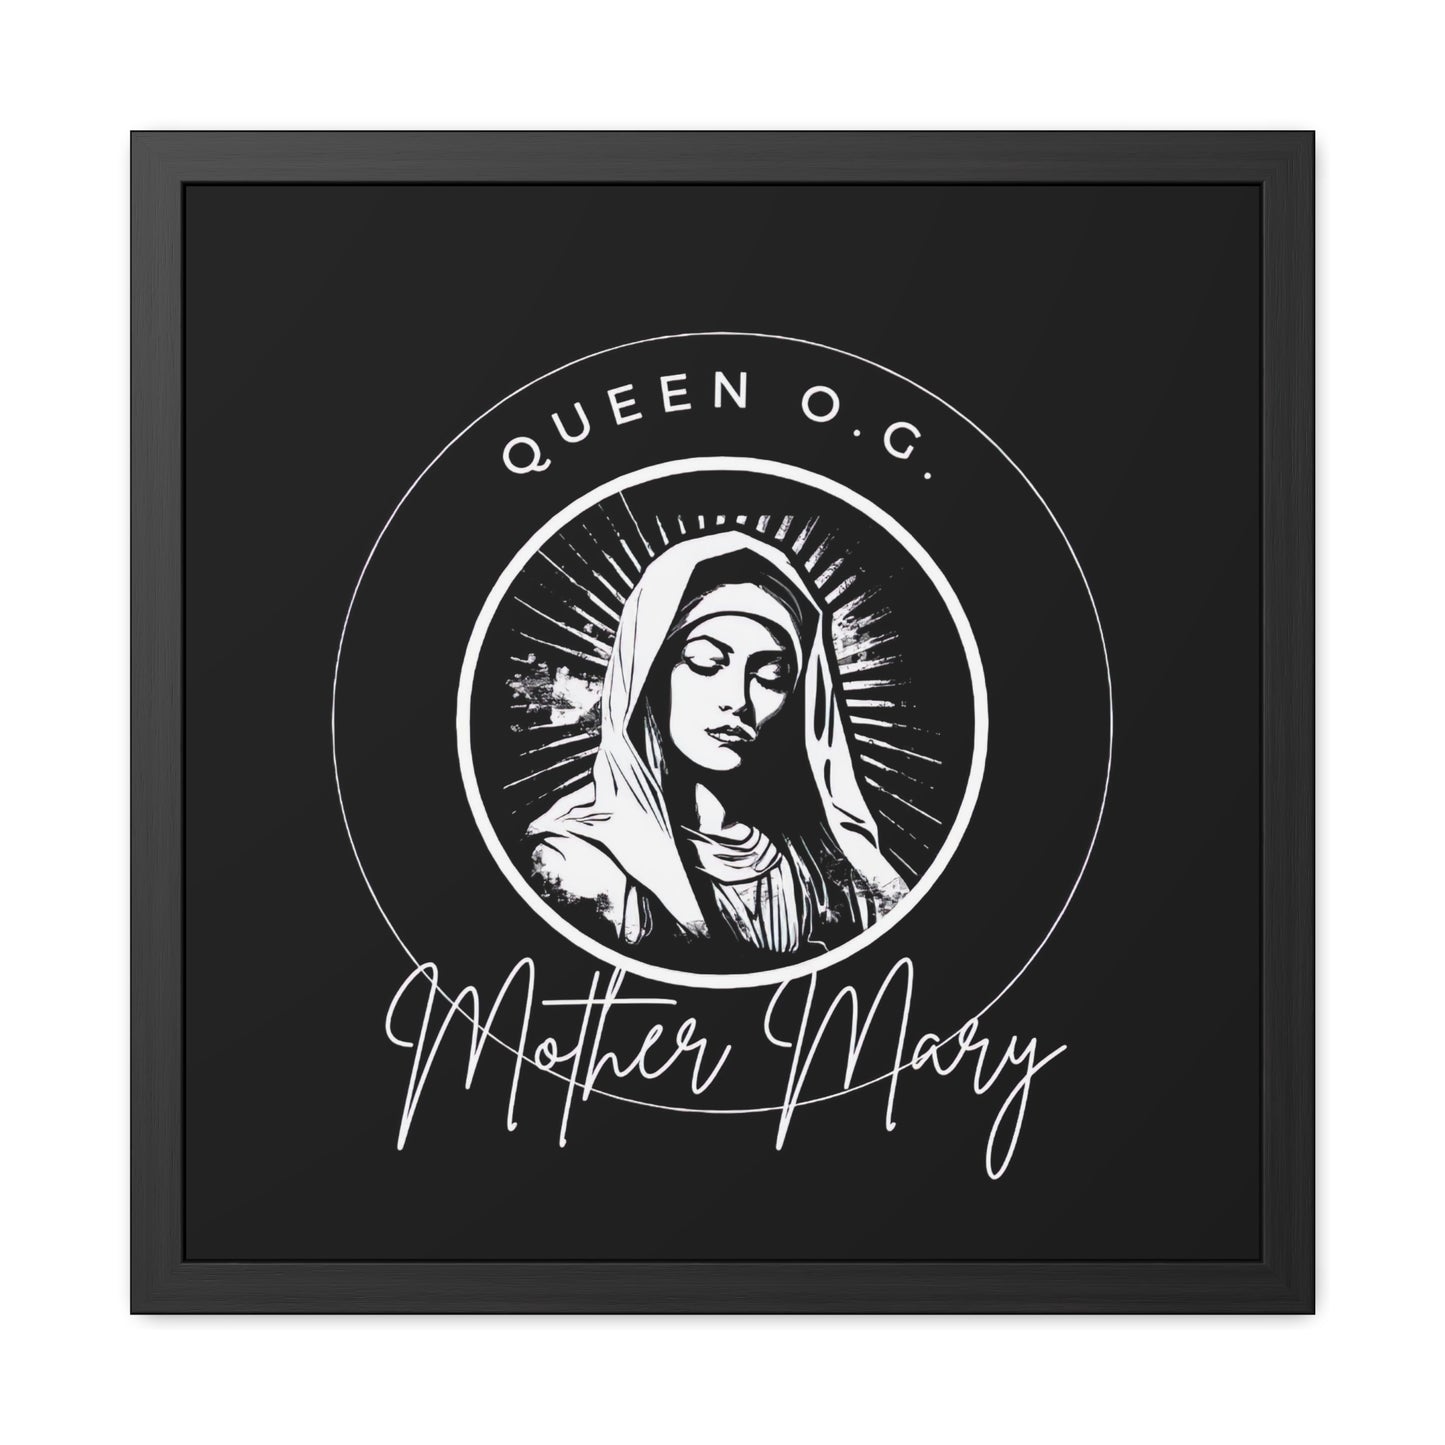 Mother Mary: The Queen O.G - Framed Poster